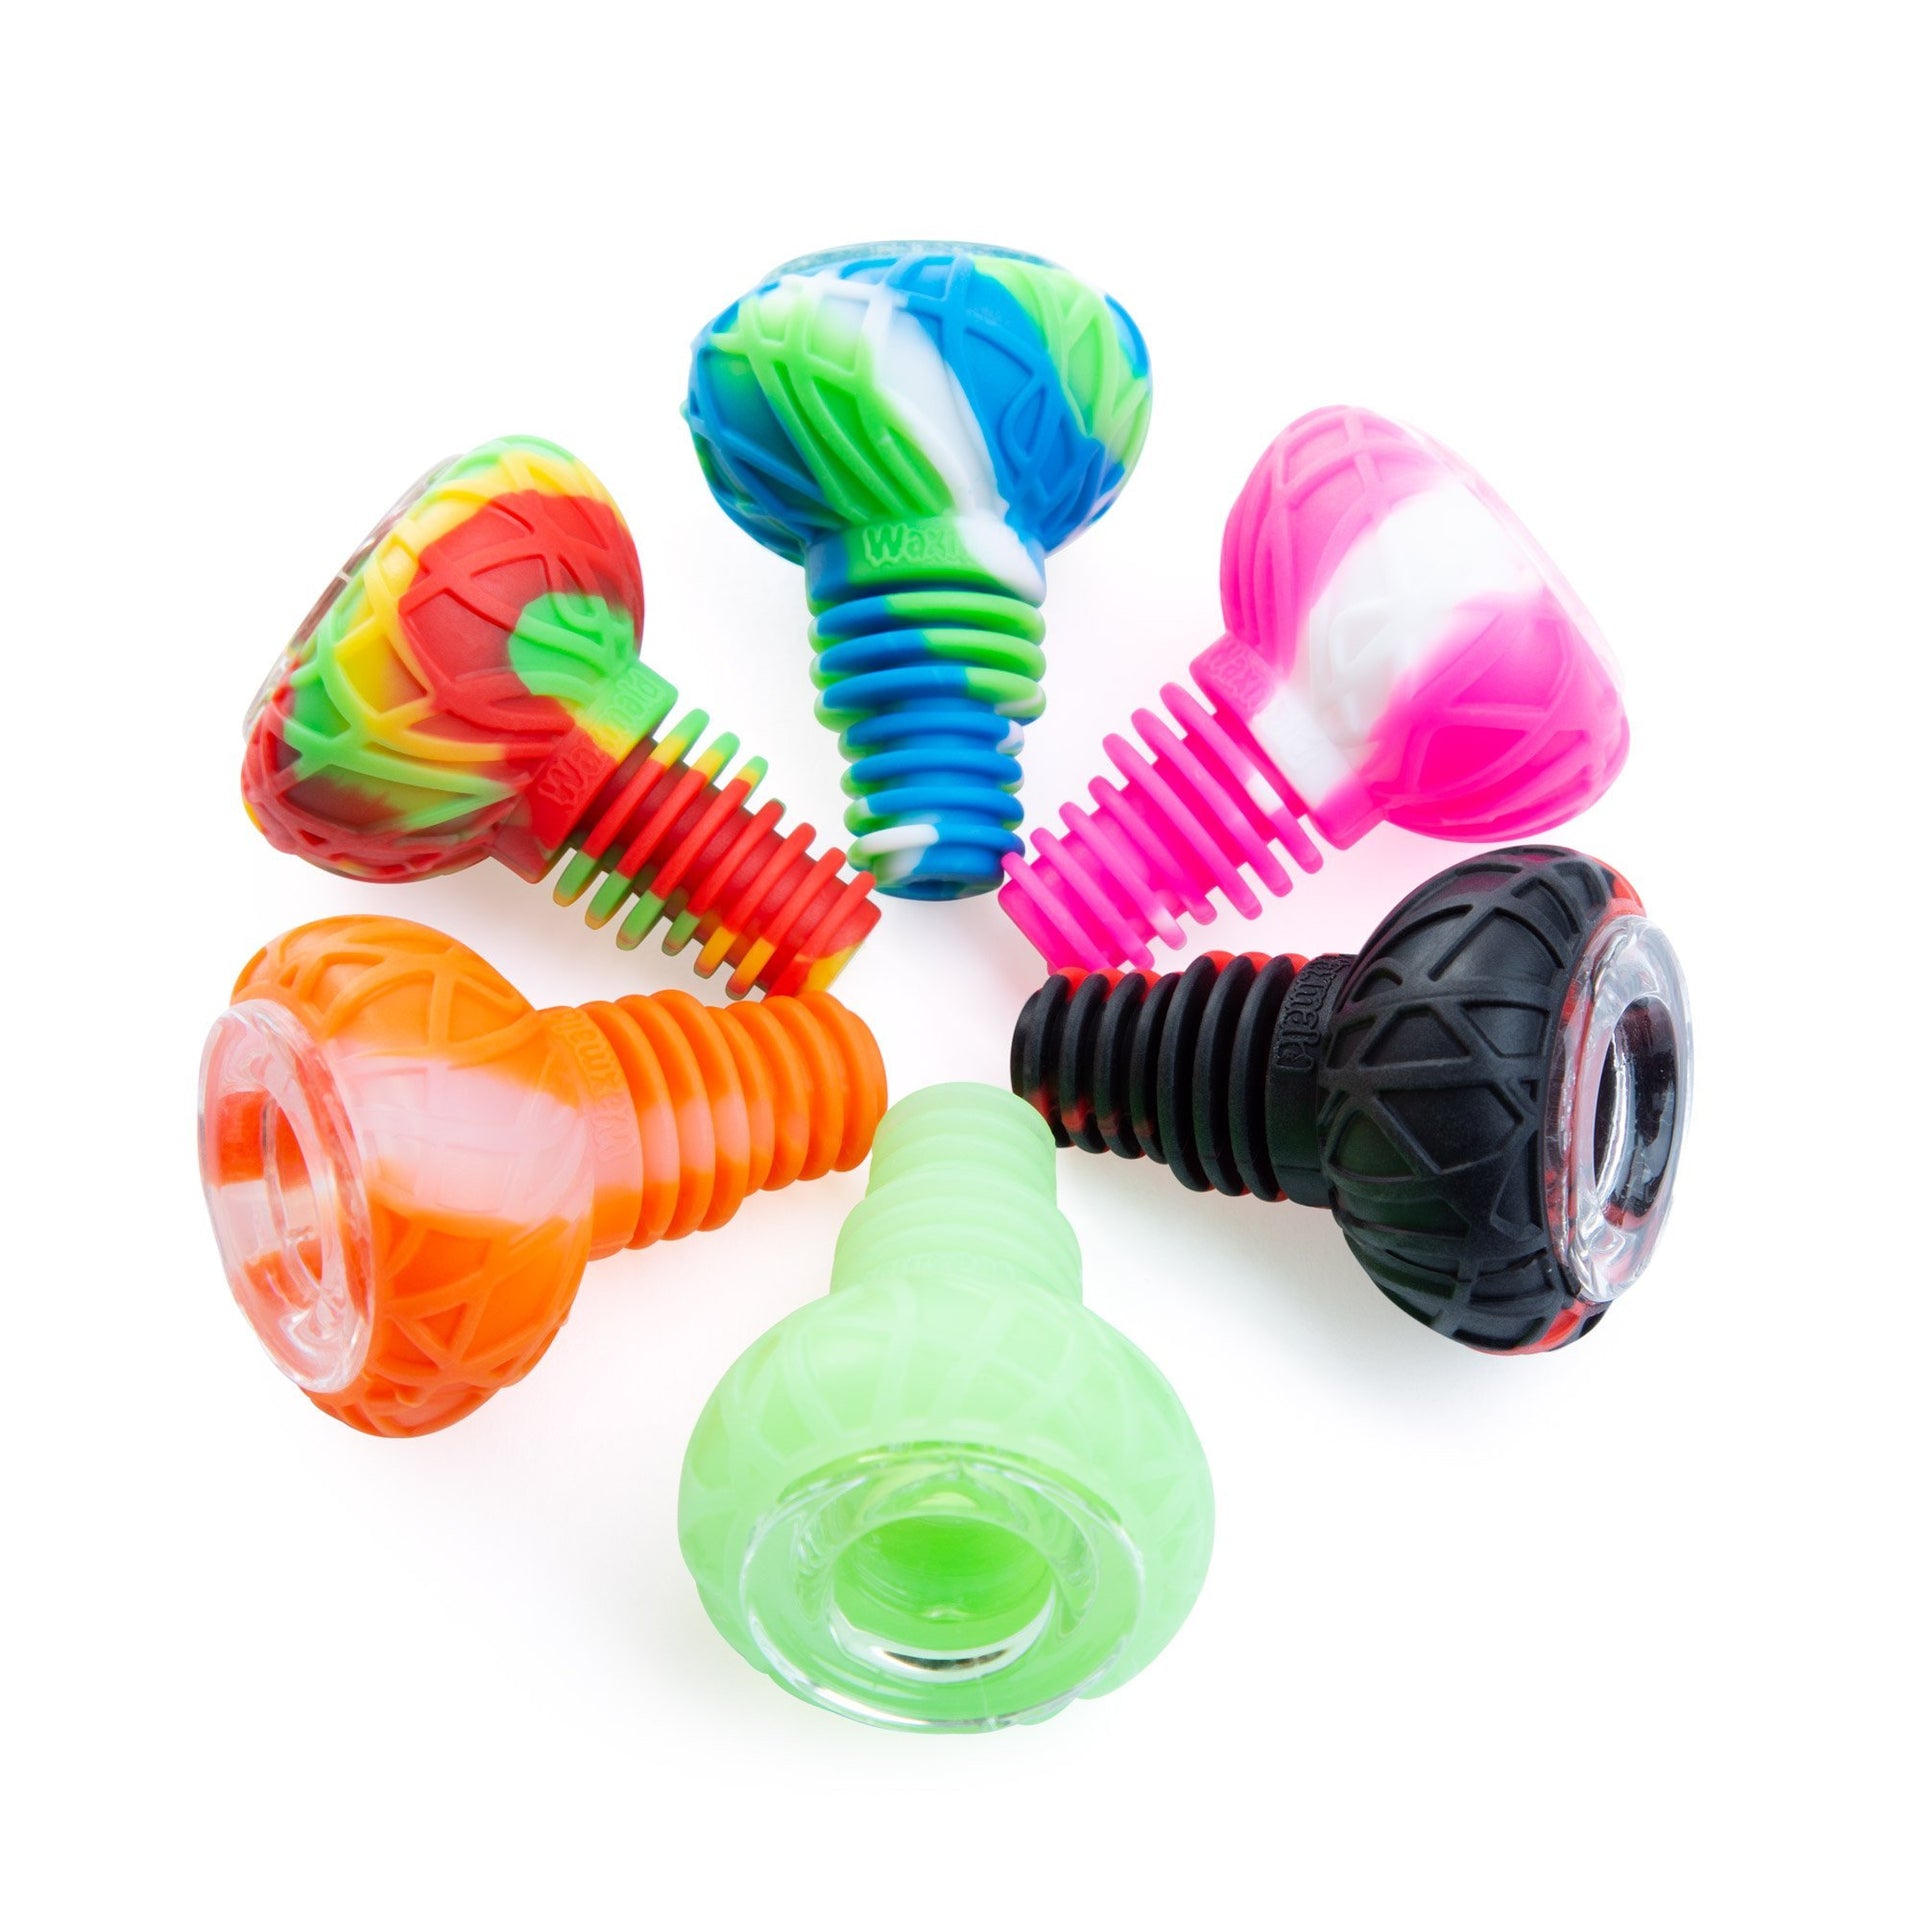 Silicone Weed Bowls of different colors